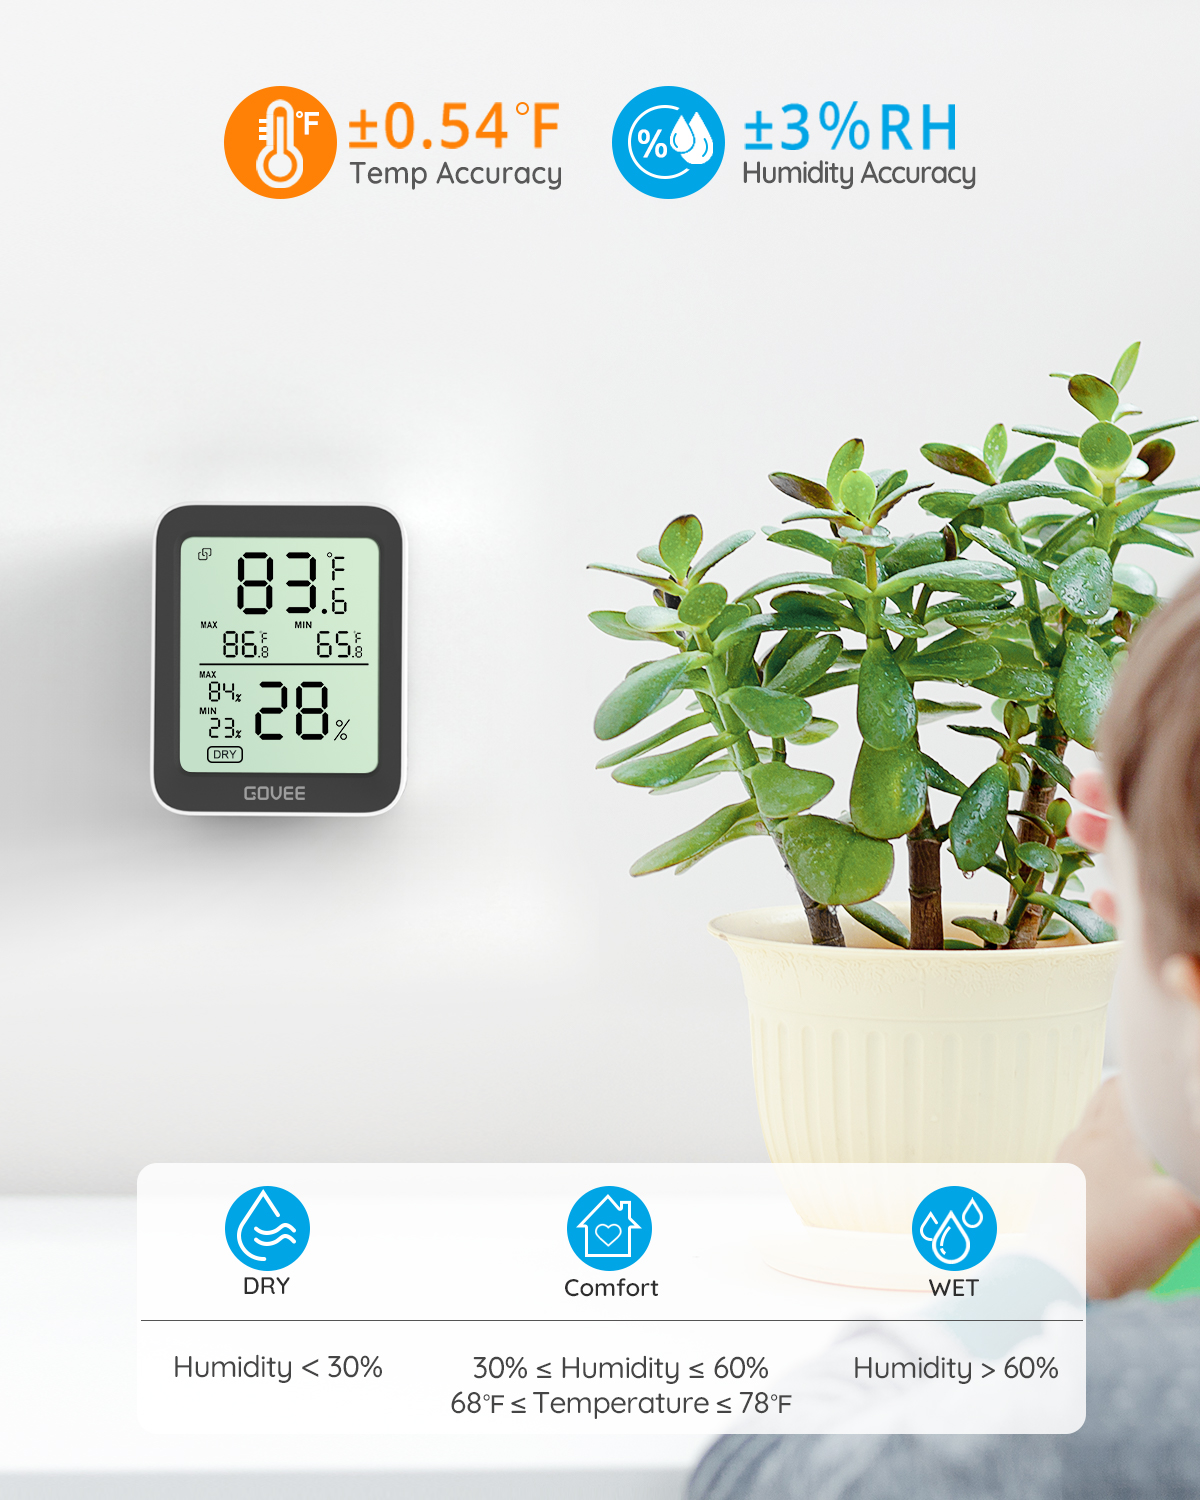 Govee Smart Thermo-Hygrometer with display